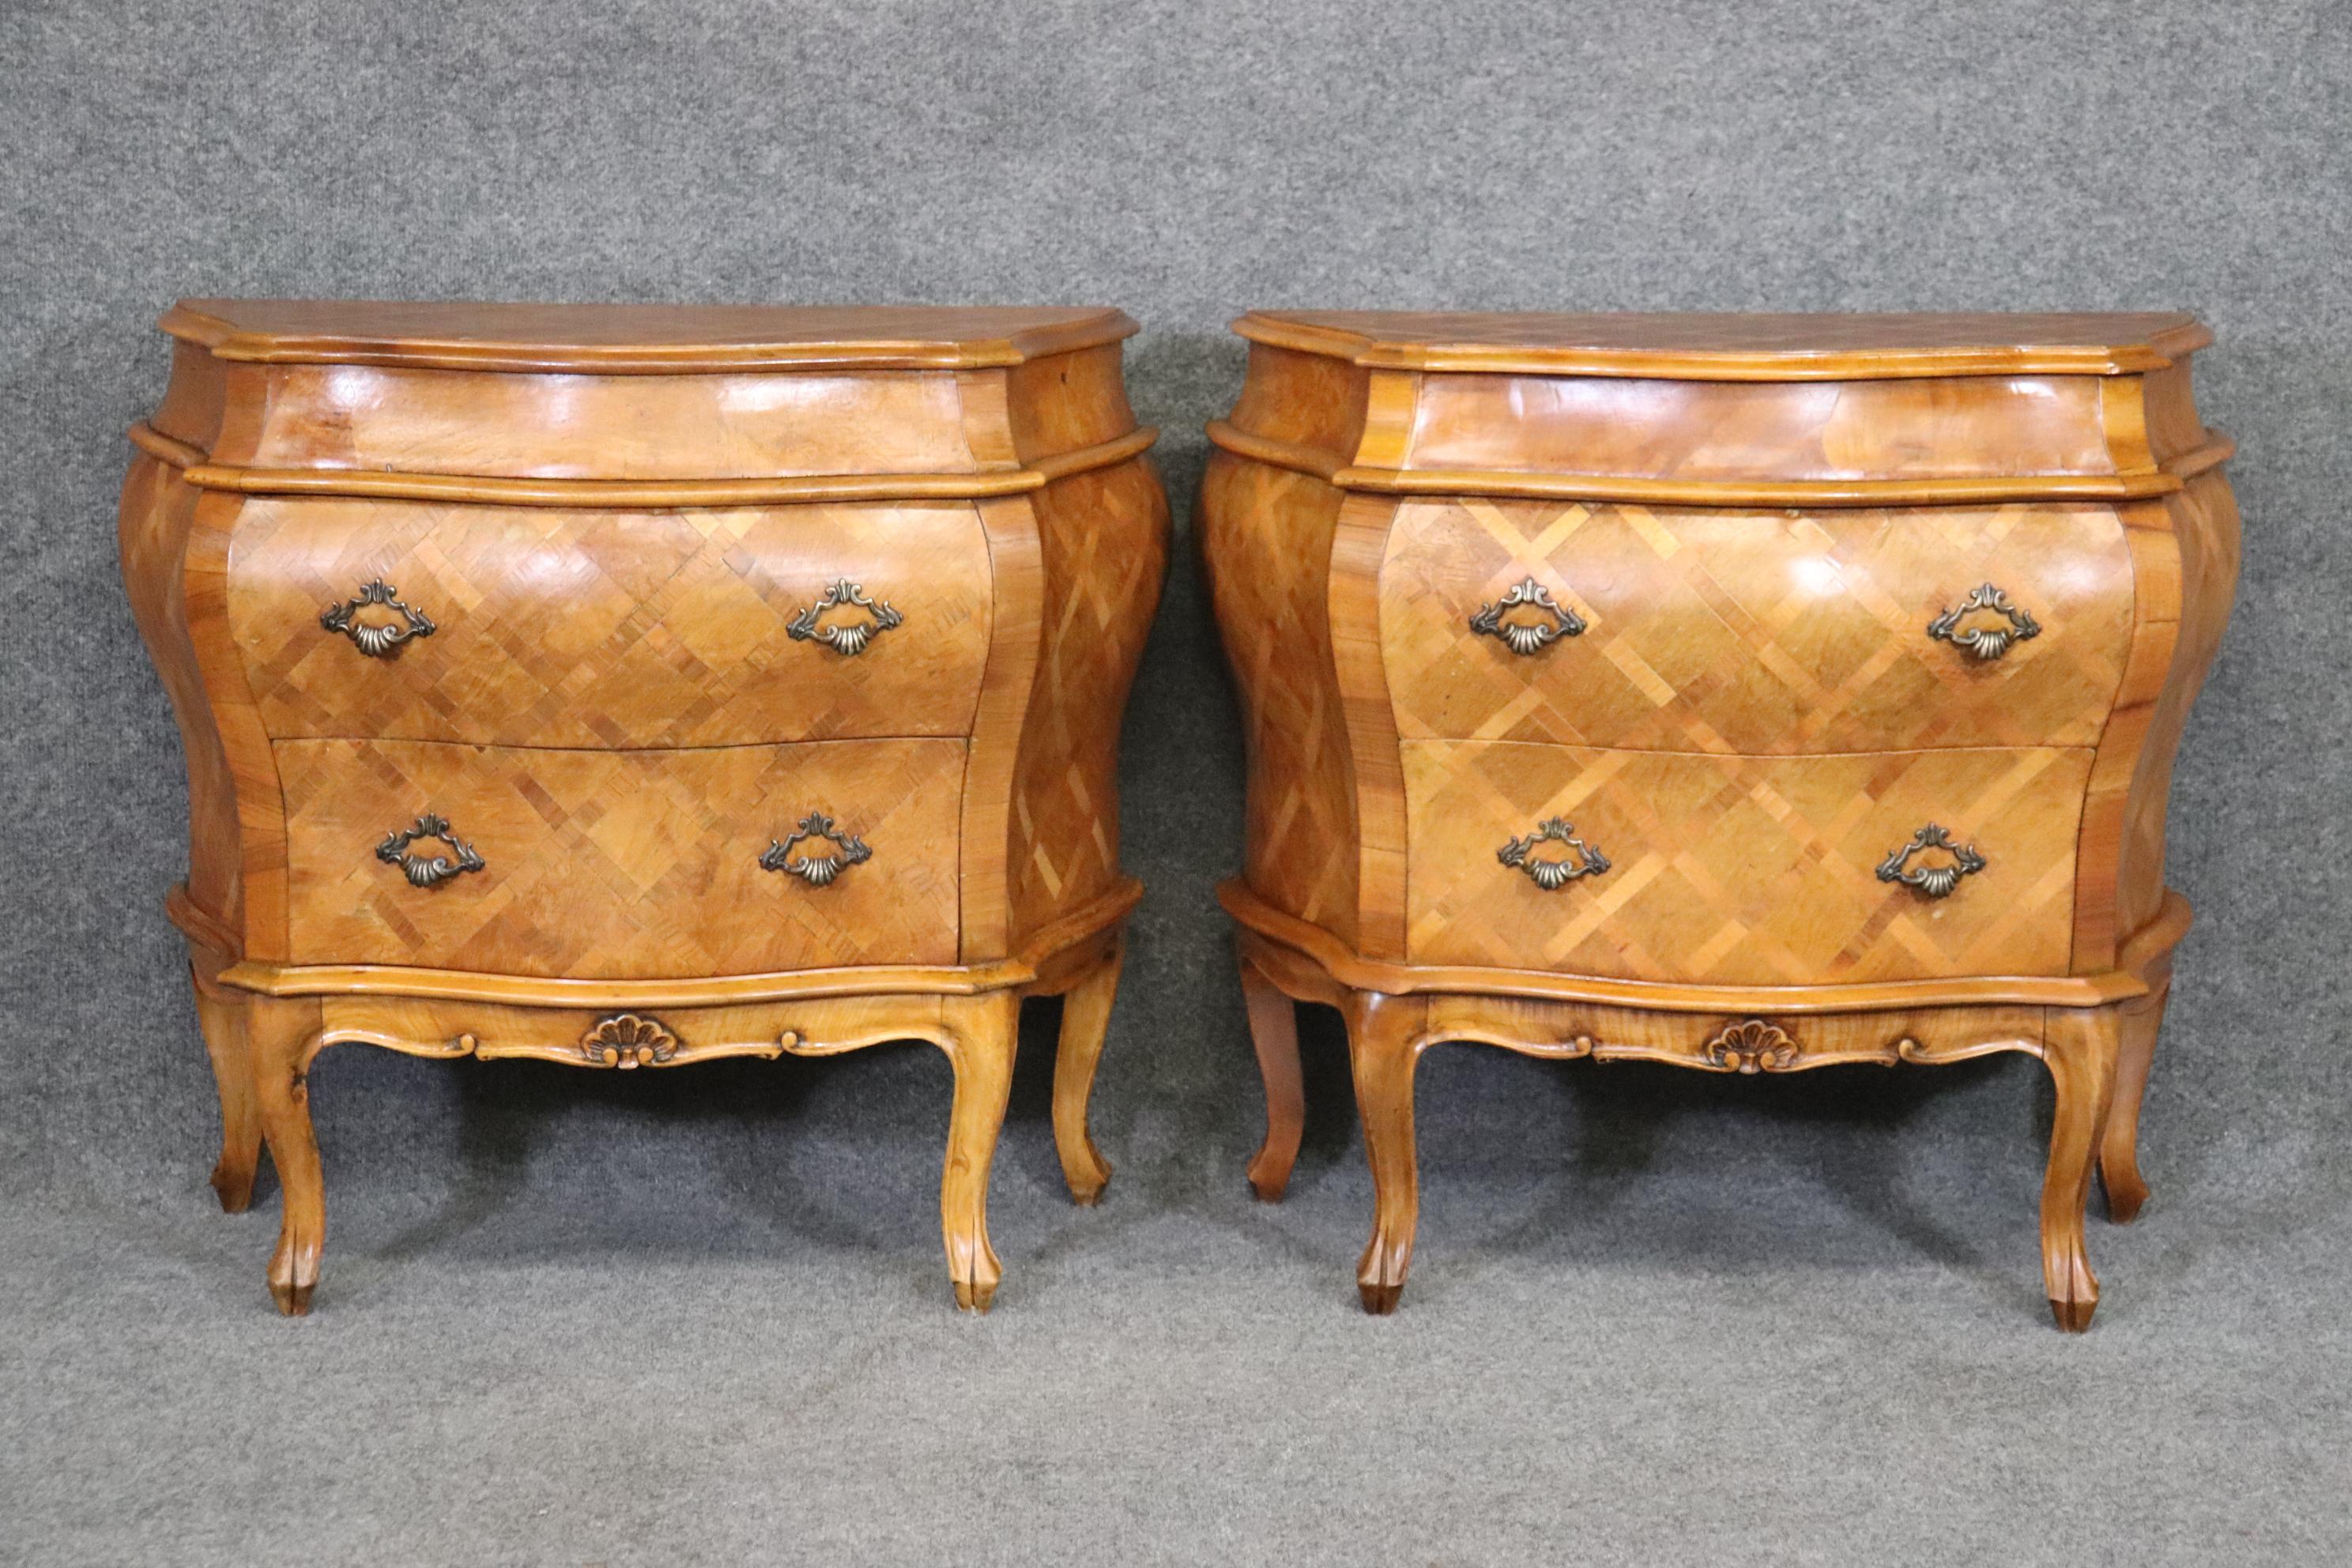 This is a beautiful pair of cross-hatch inlaid olivewood commodes or nightstands with finished backs. They are in good vintage condition and one is slightly darker than the other due to to sunlight fading. The stands are have brass handles and in